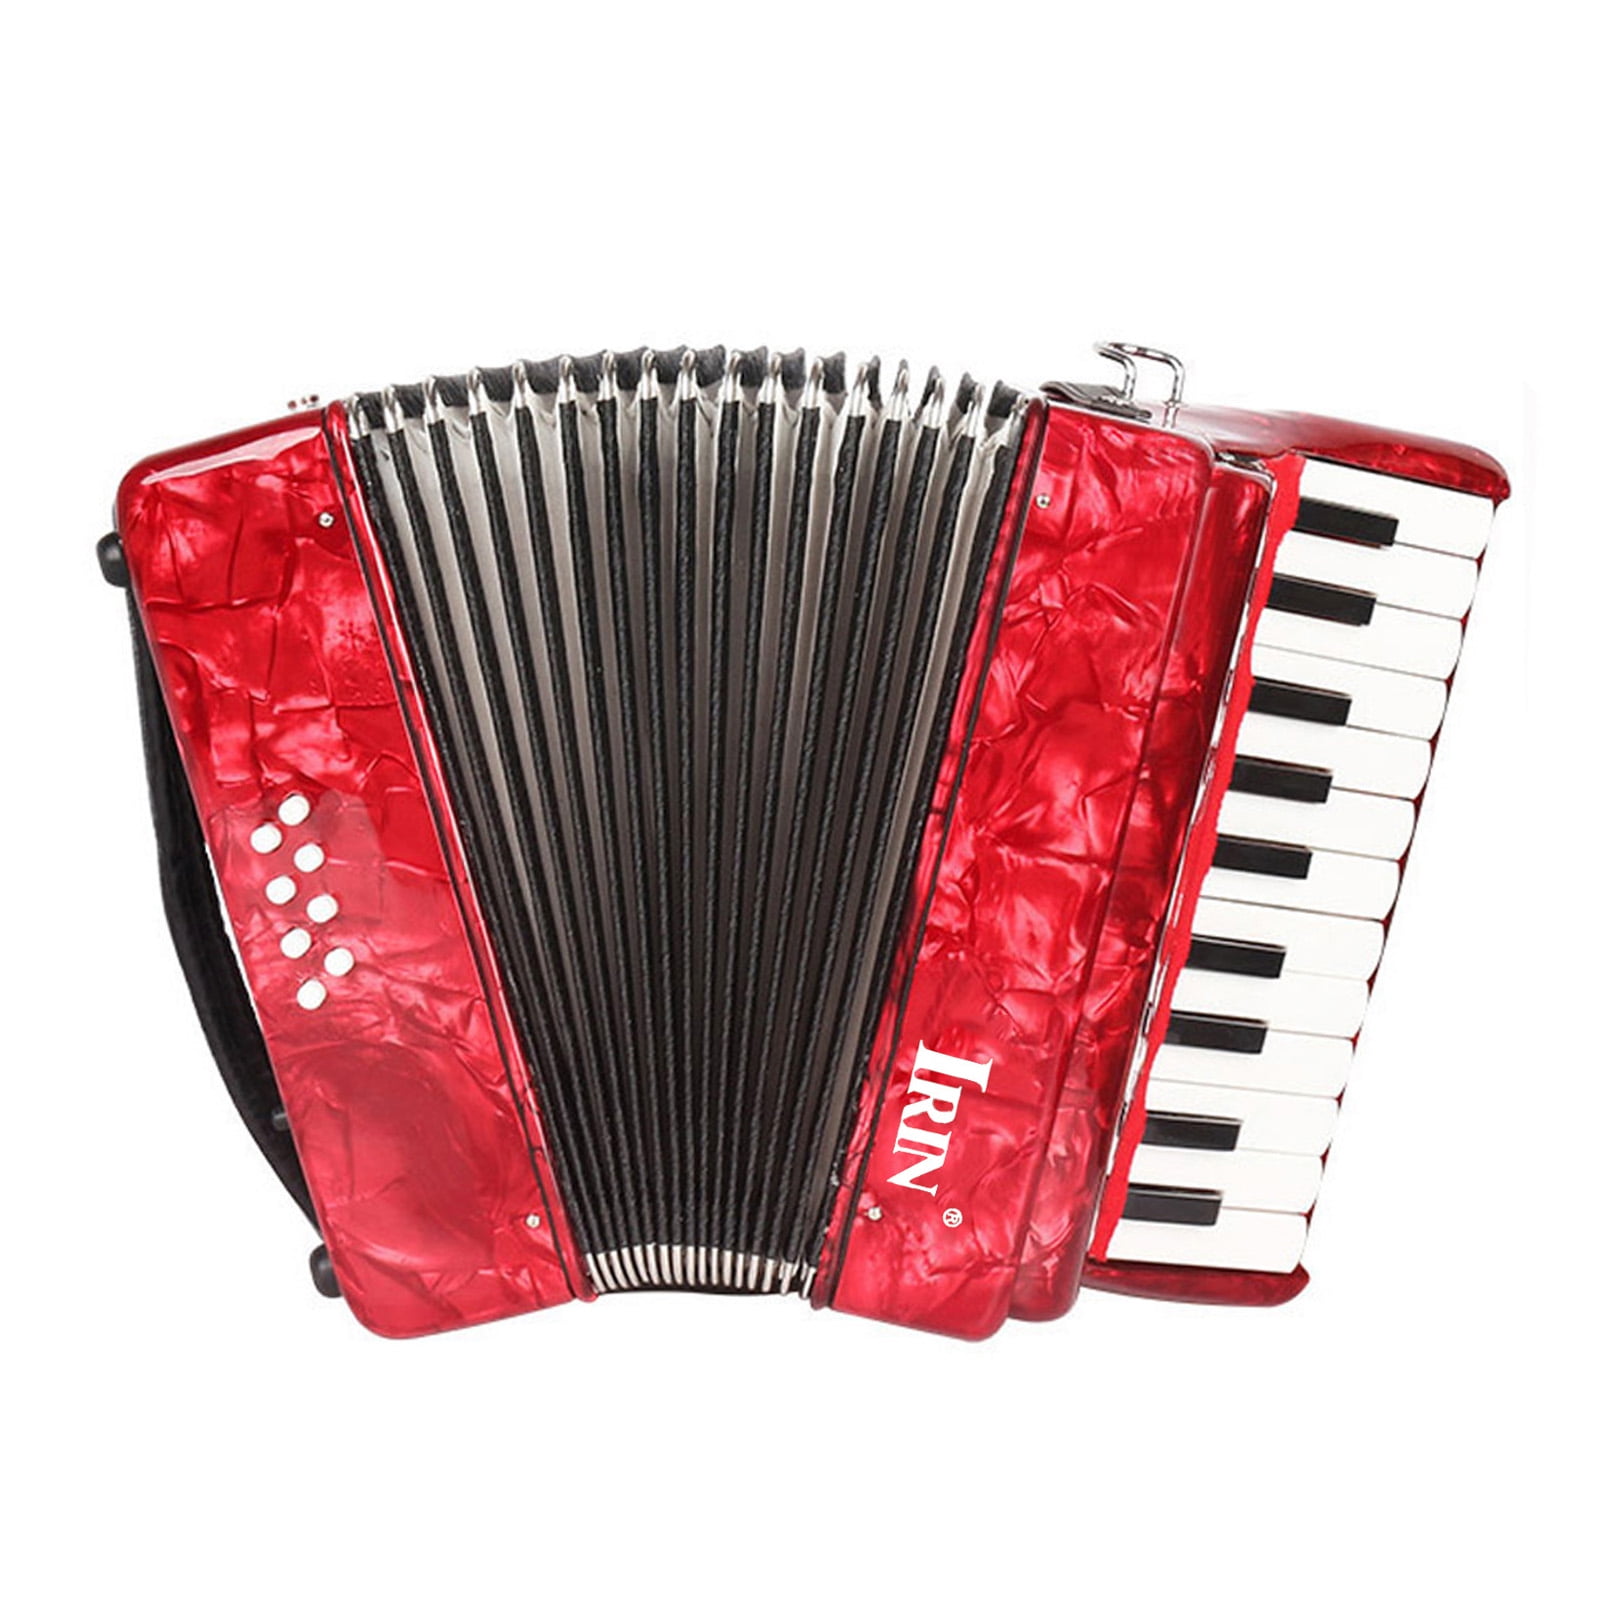 Kids Educational Kids Accordion Instrument with Adjustable Strap for Professionals 22 Keys 8 Bass Accordion Musical Instrument Beginners Professional Accordion Stage Performance 